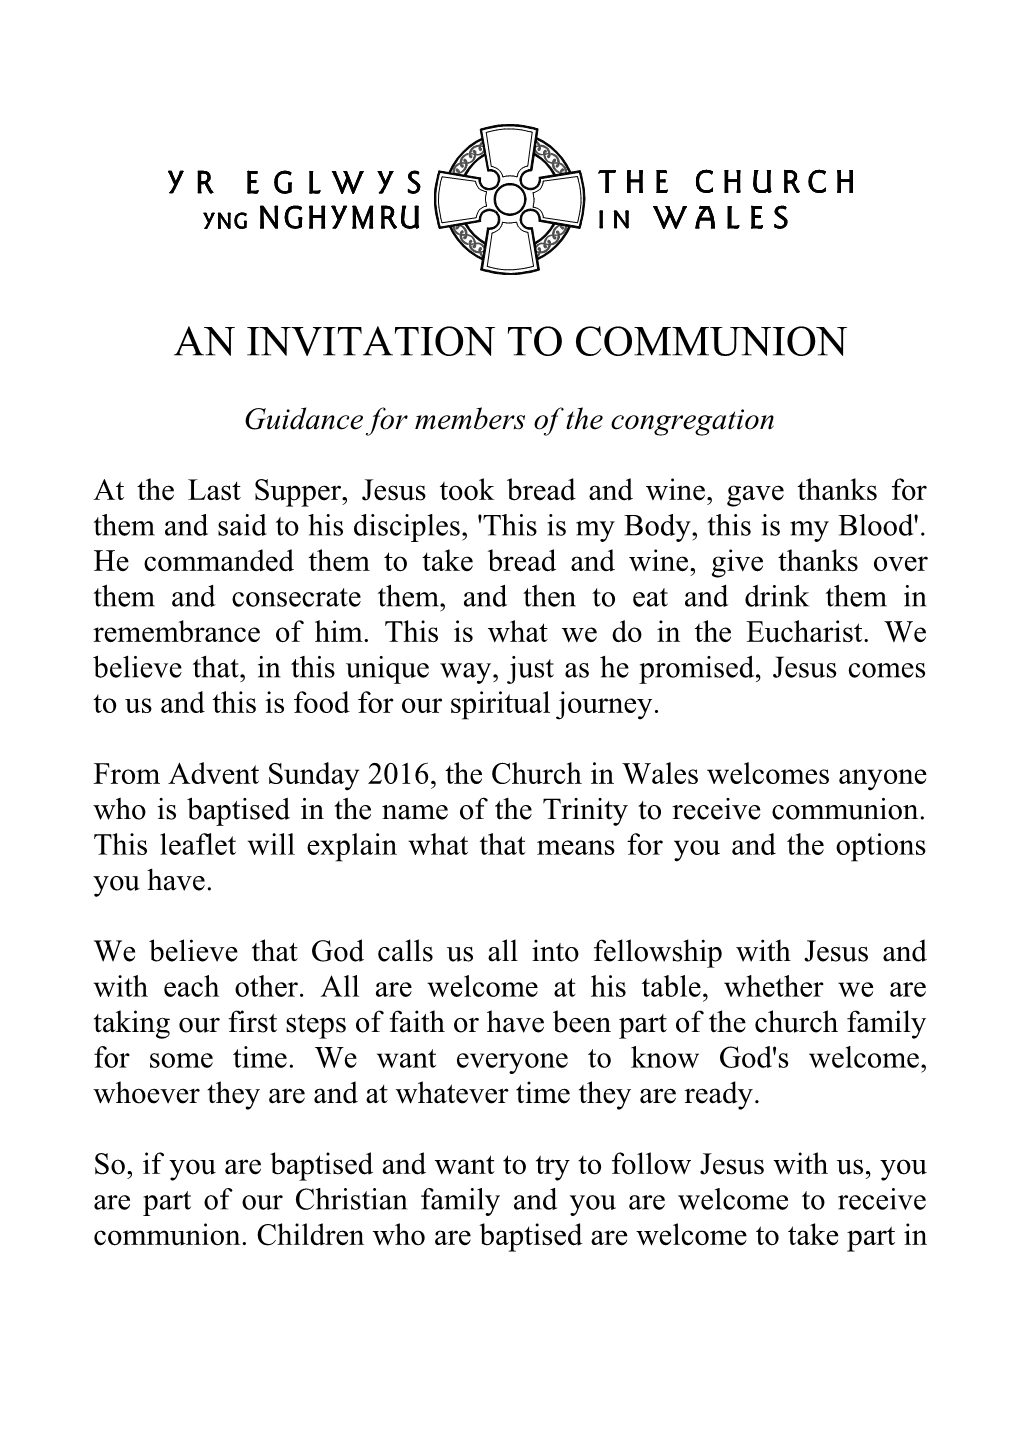 Guidance for Members of the Congregation